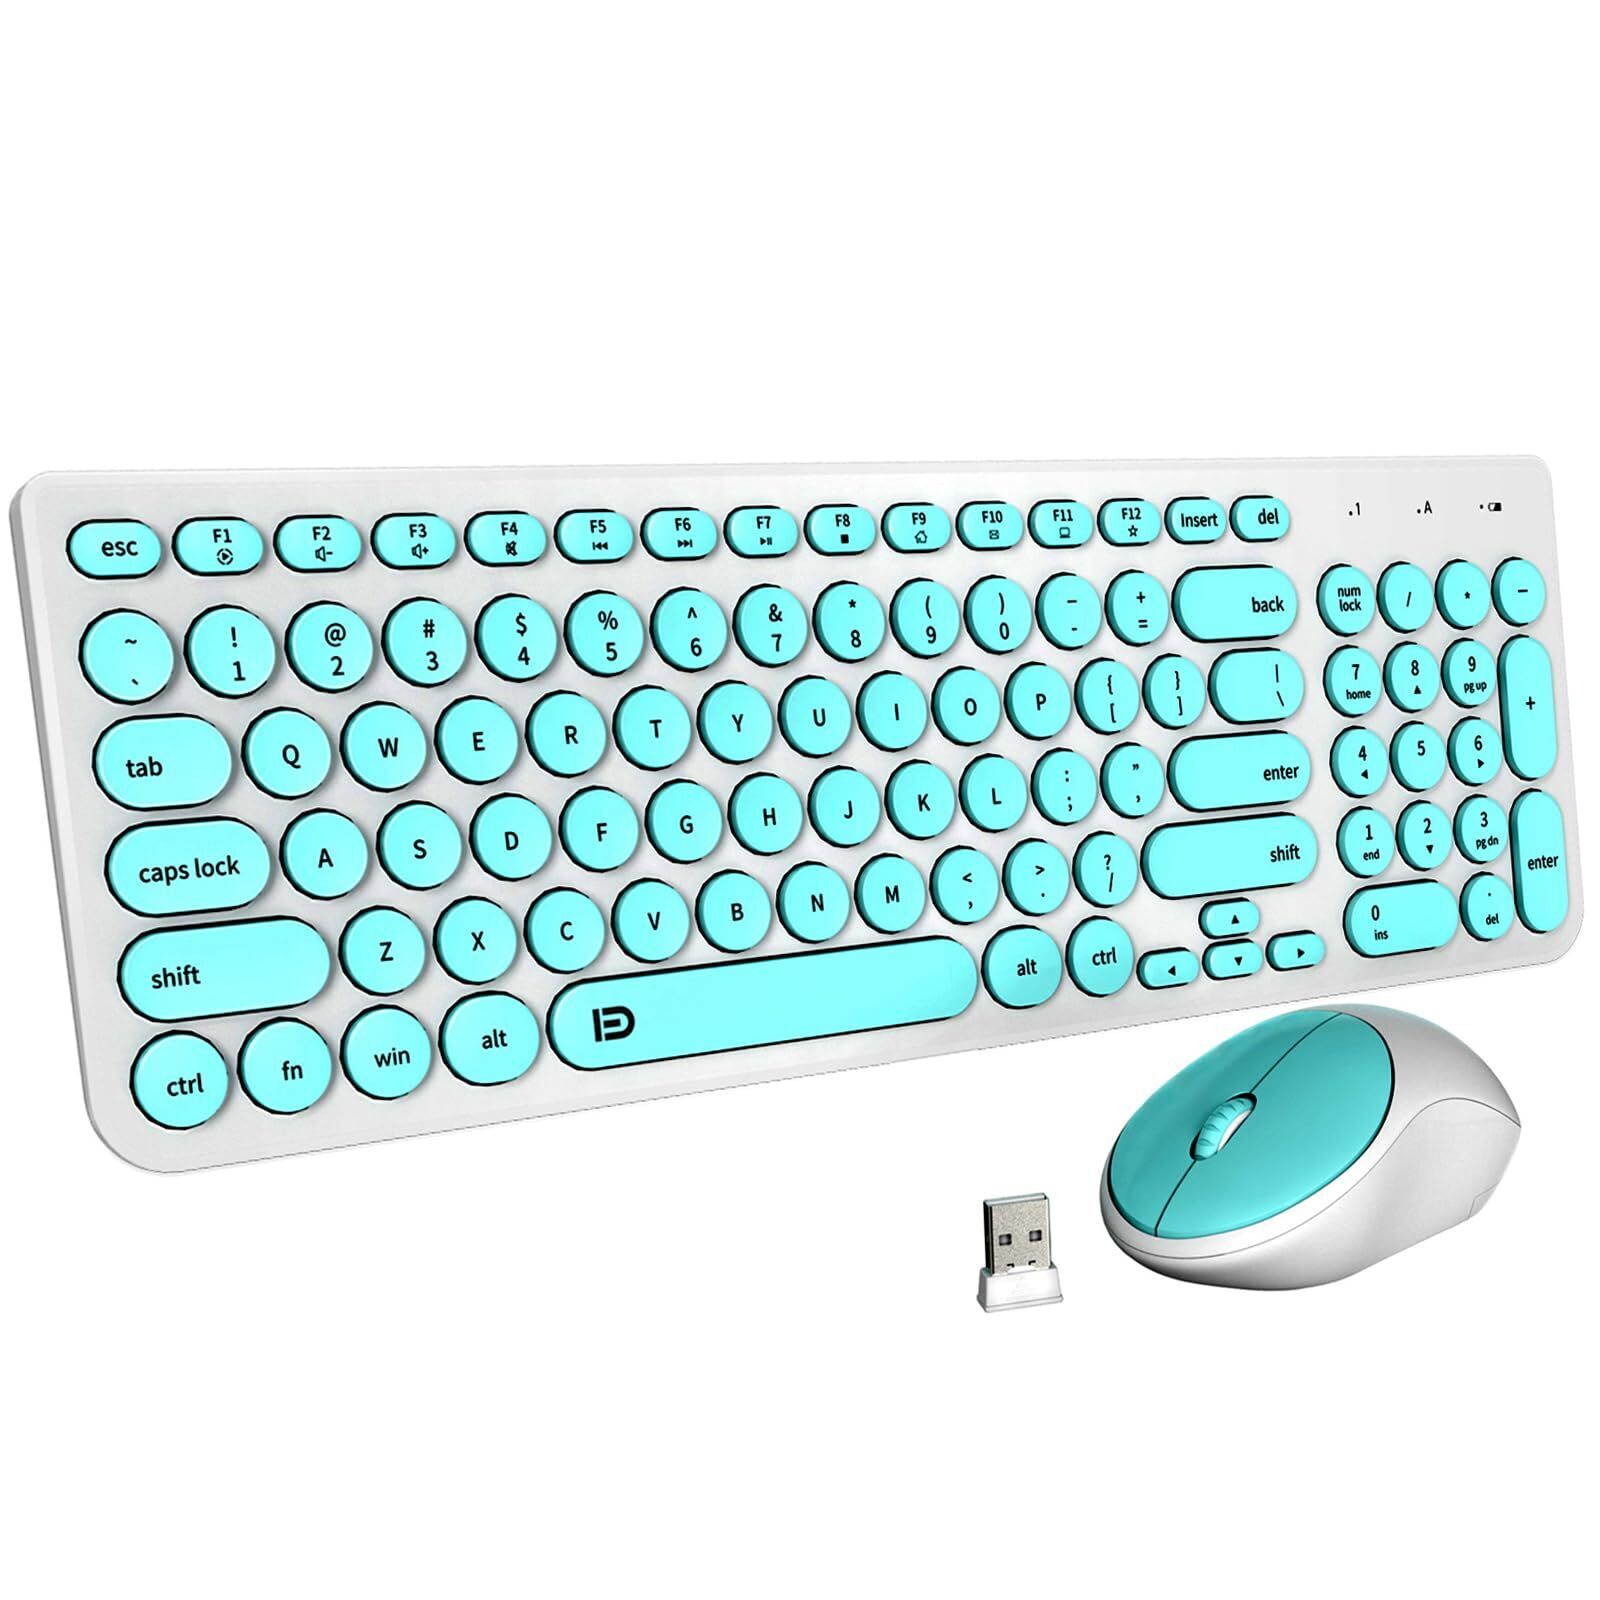 Wireless Keyboard and Mouse Combo - 2.4GHz USB Cordless, Cute Round Keys, Qui...